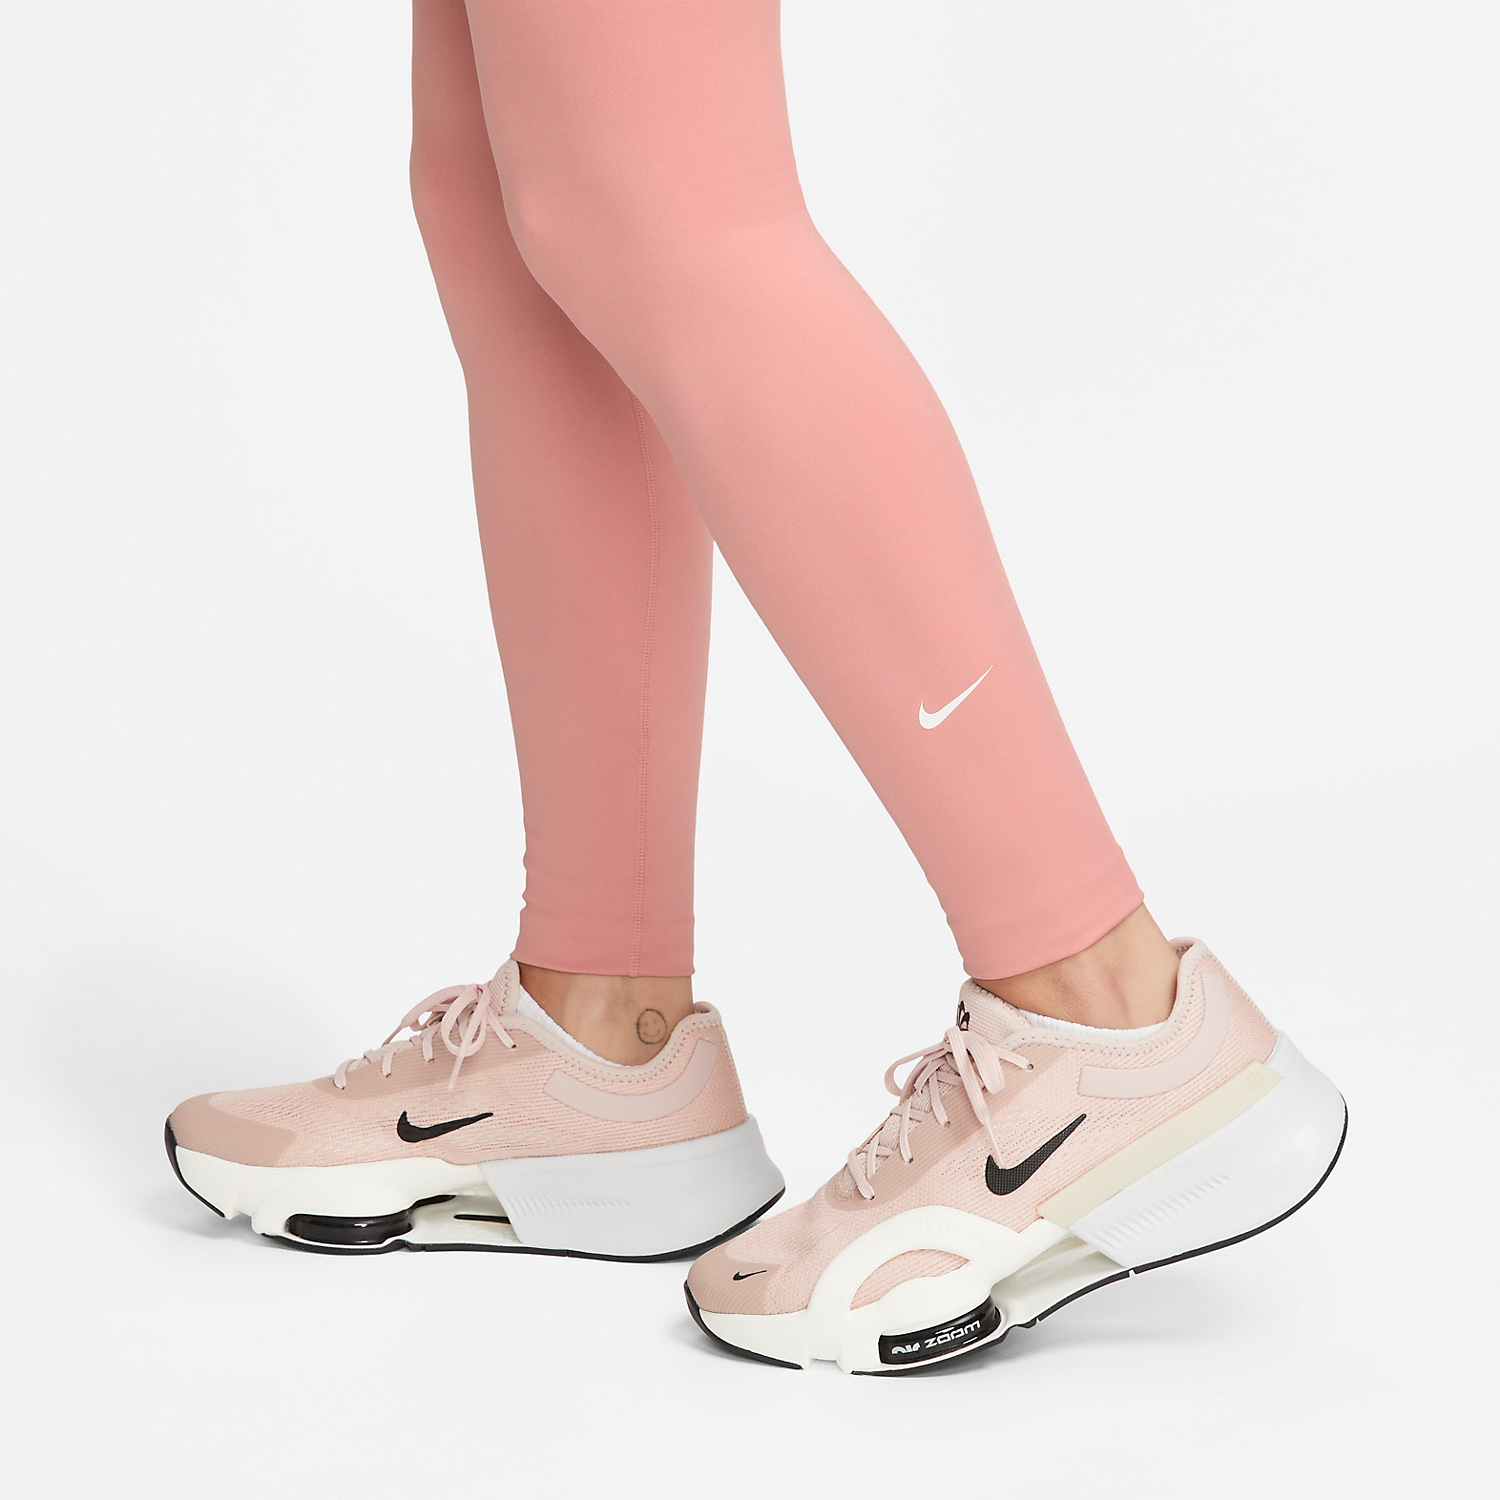 Nike One Women's Training Tights - Red Stardust/White